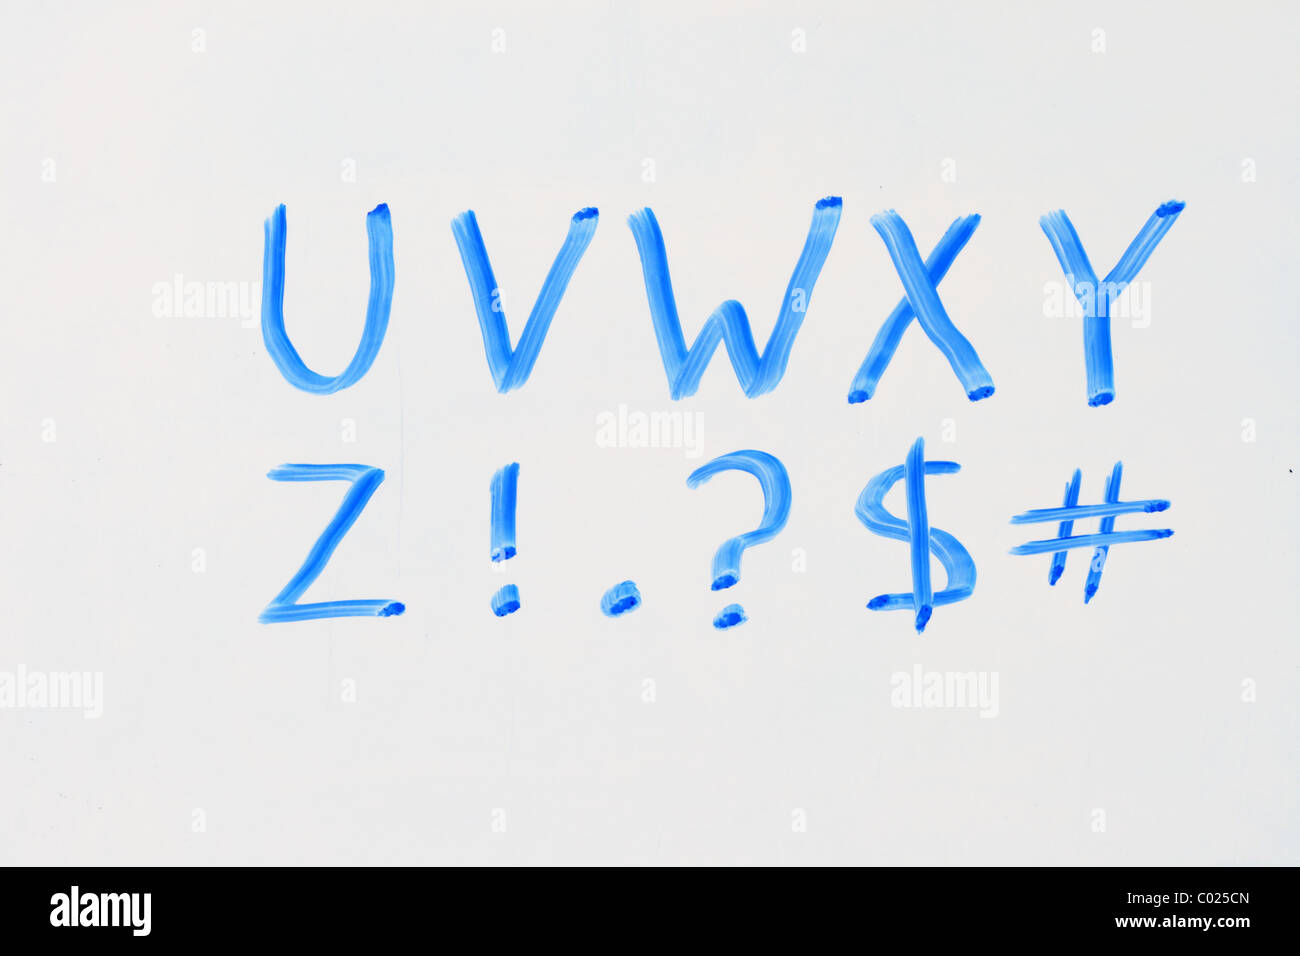 the letters U V W X Y Z and punctuation in blue marker on a dry erase white board Stock Photo